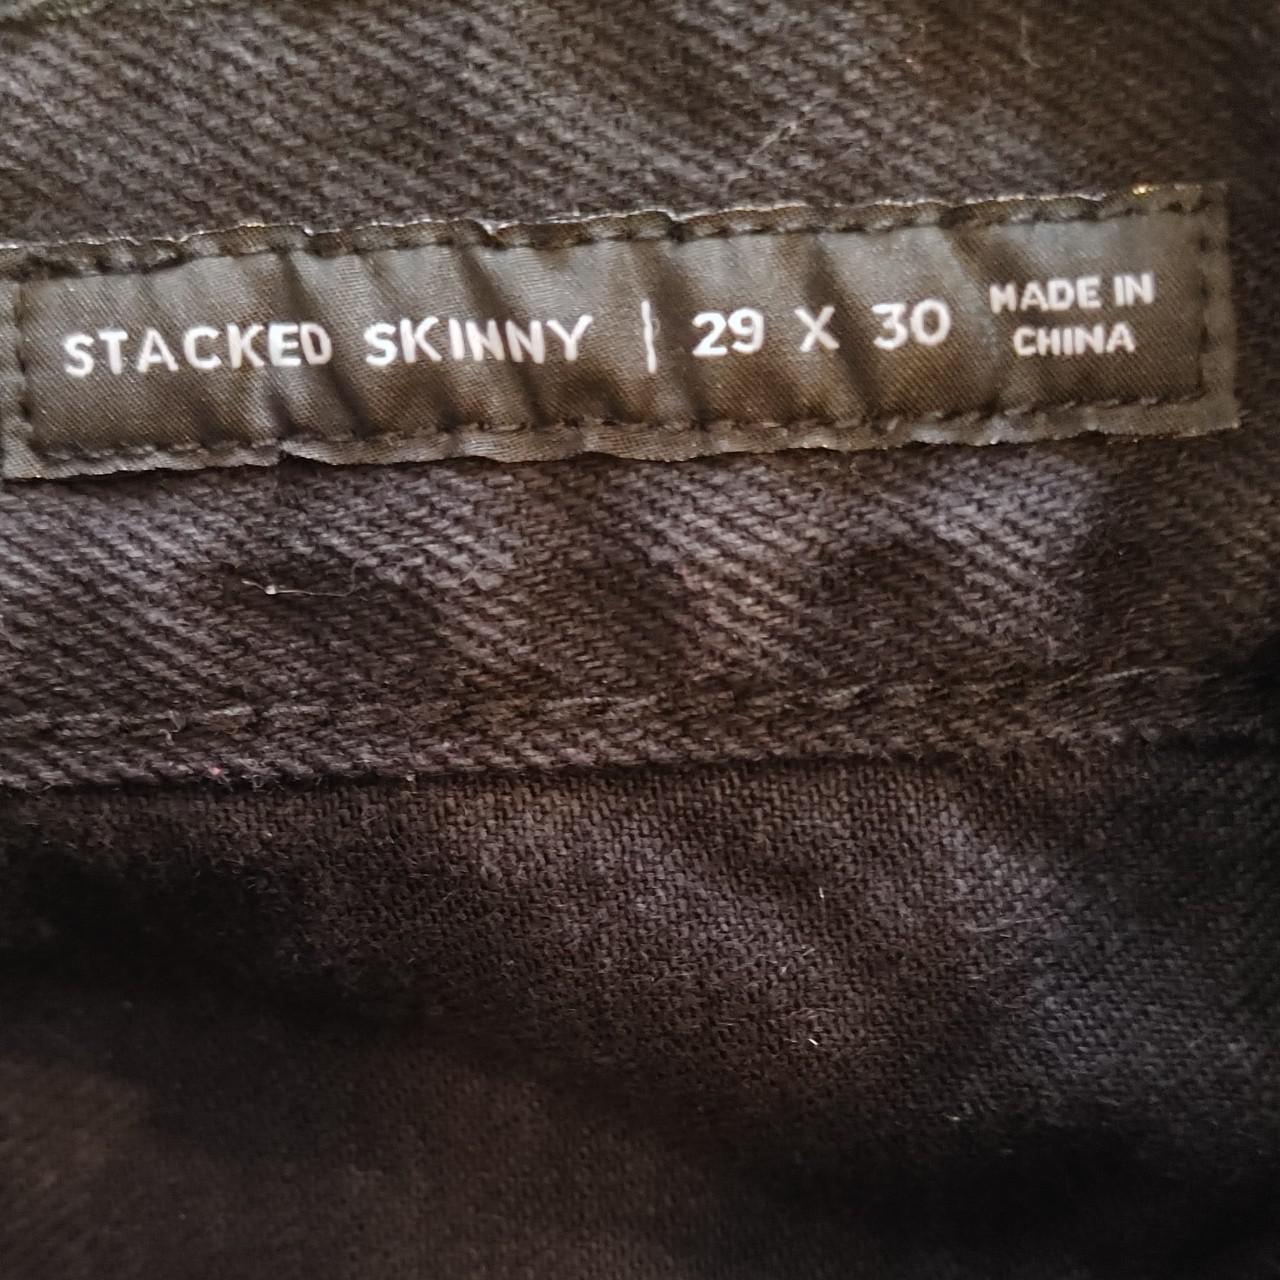 Product Image 4 - Pacsun Skinny Jeans Size 29"